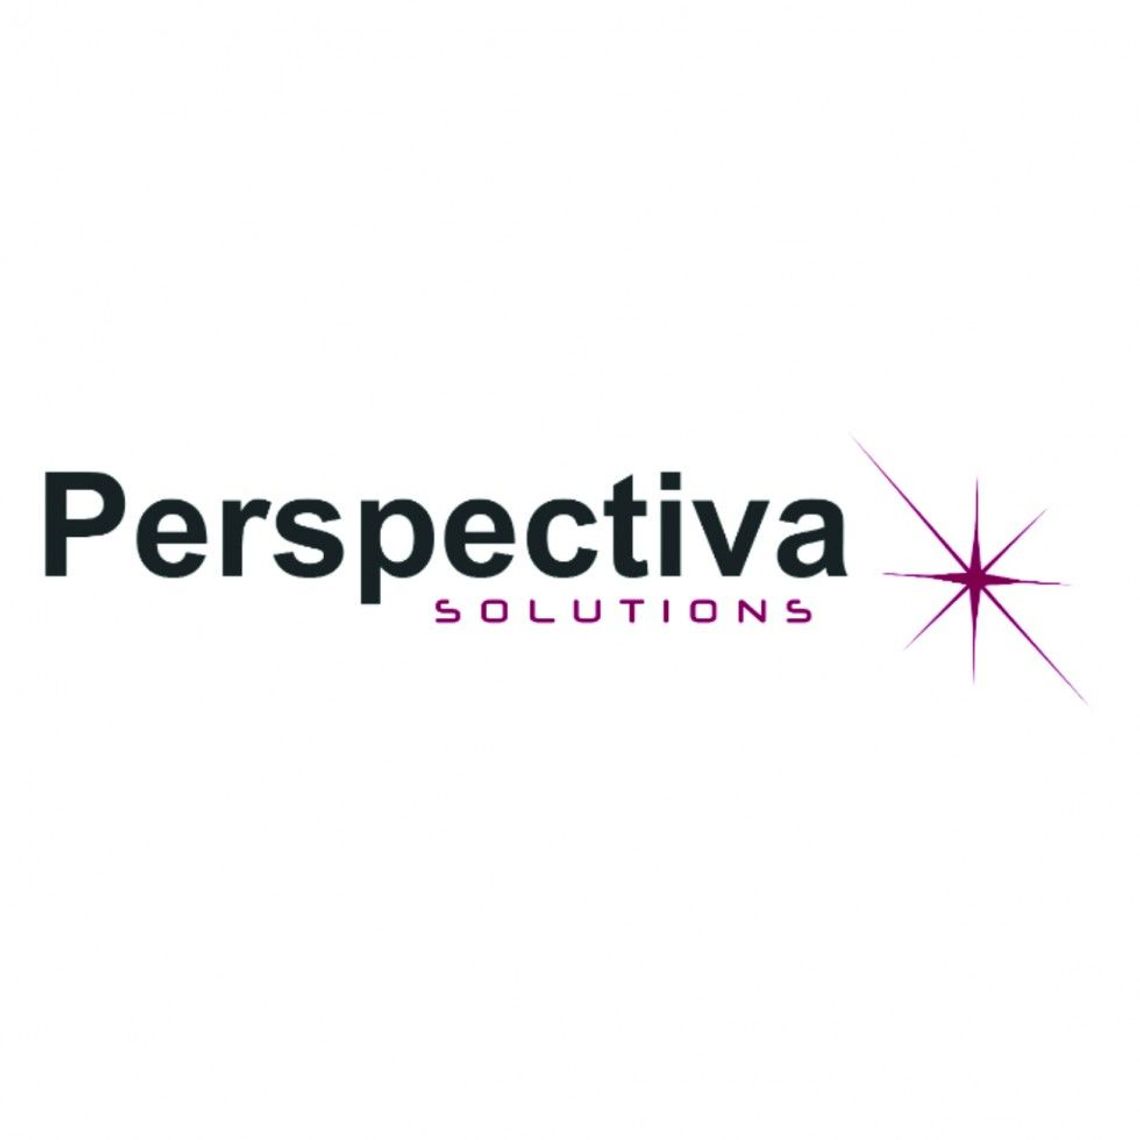 Perspectiva Solutions